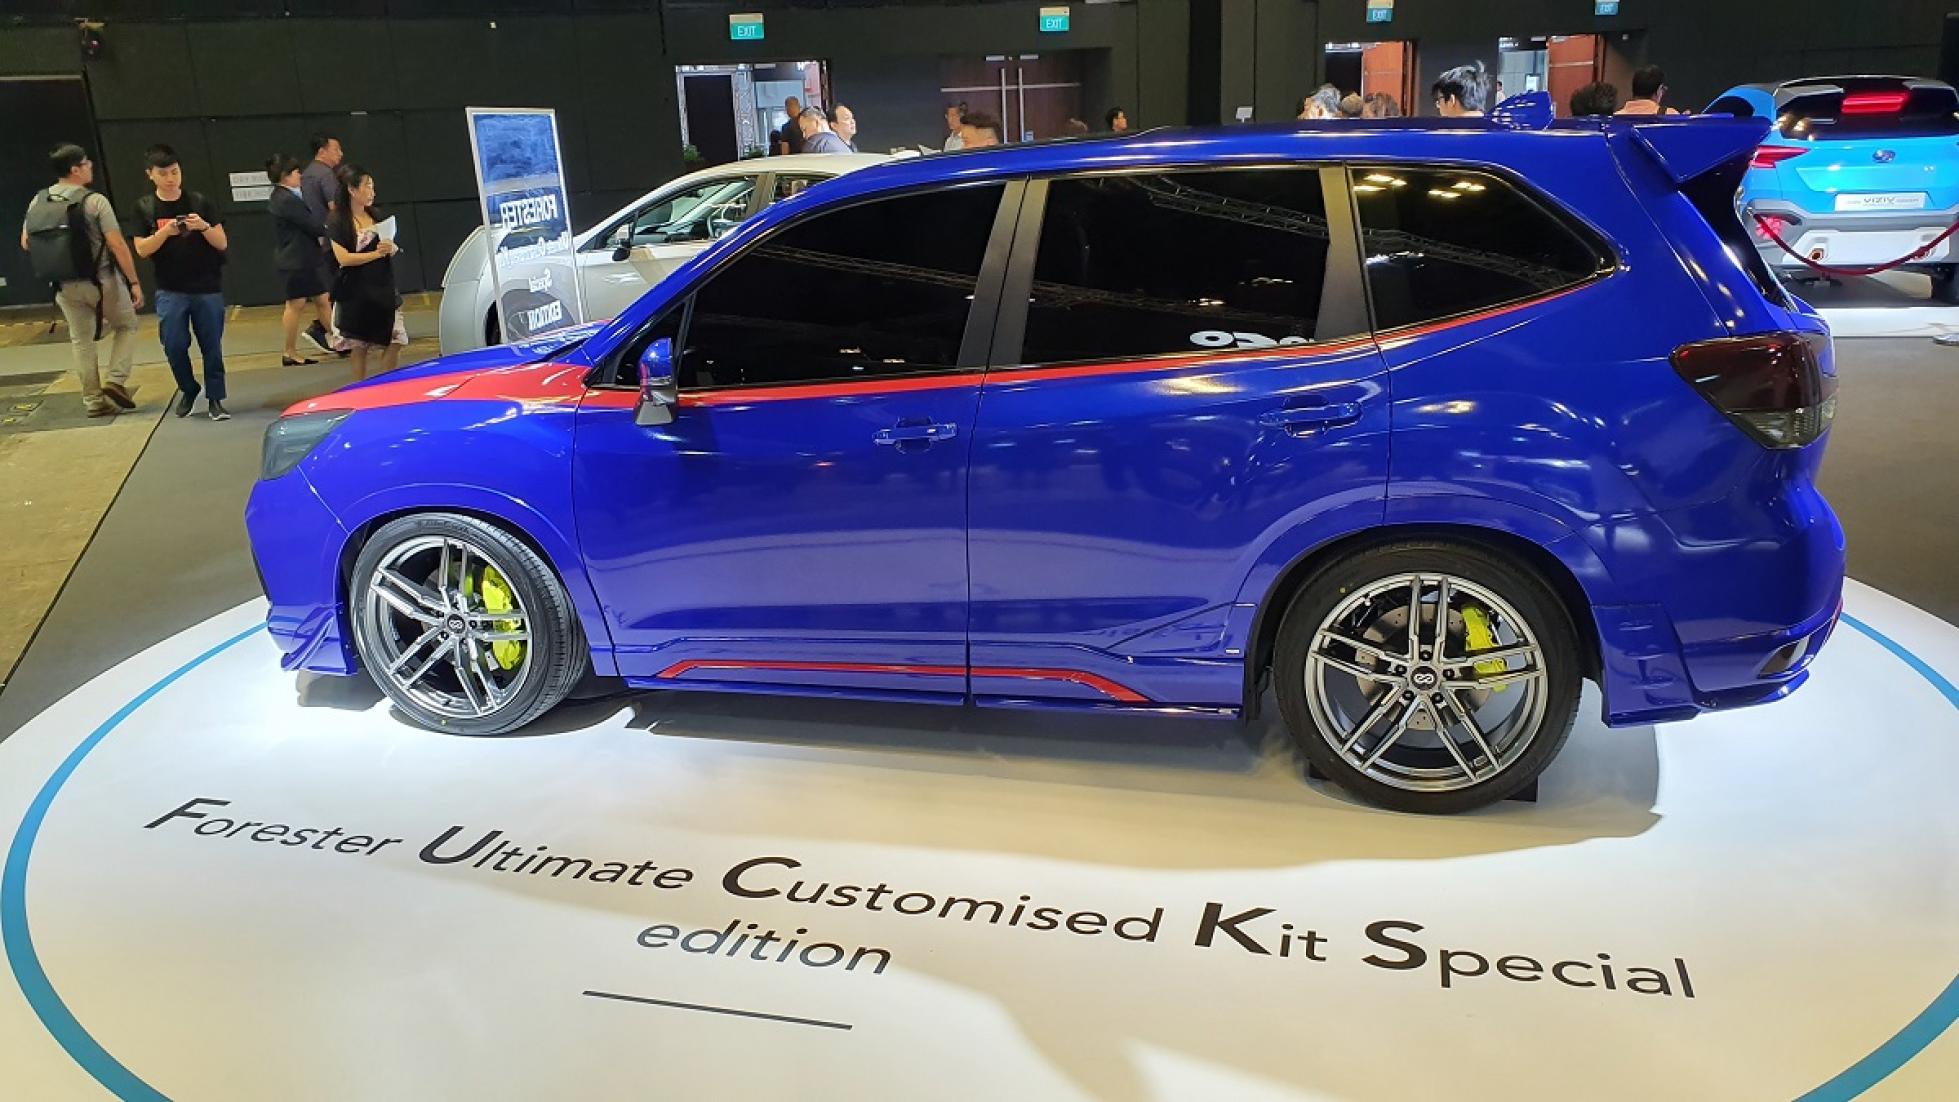 1. Subaru Forester Ultimate Customized Kit Special